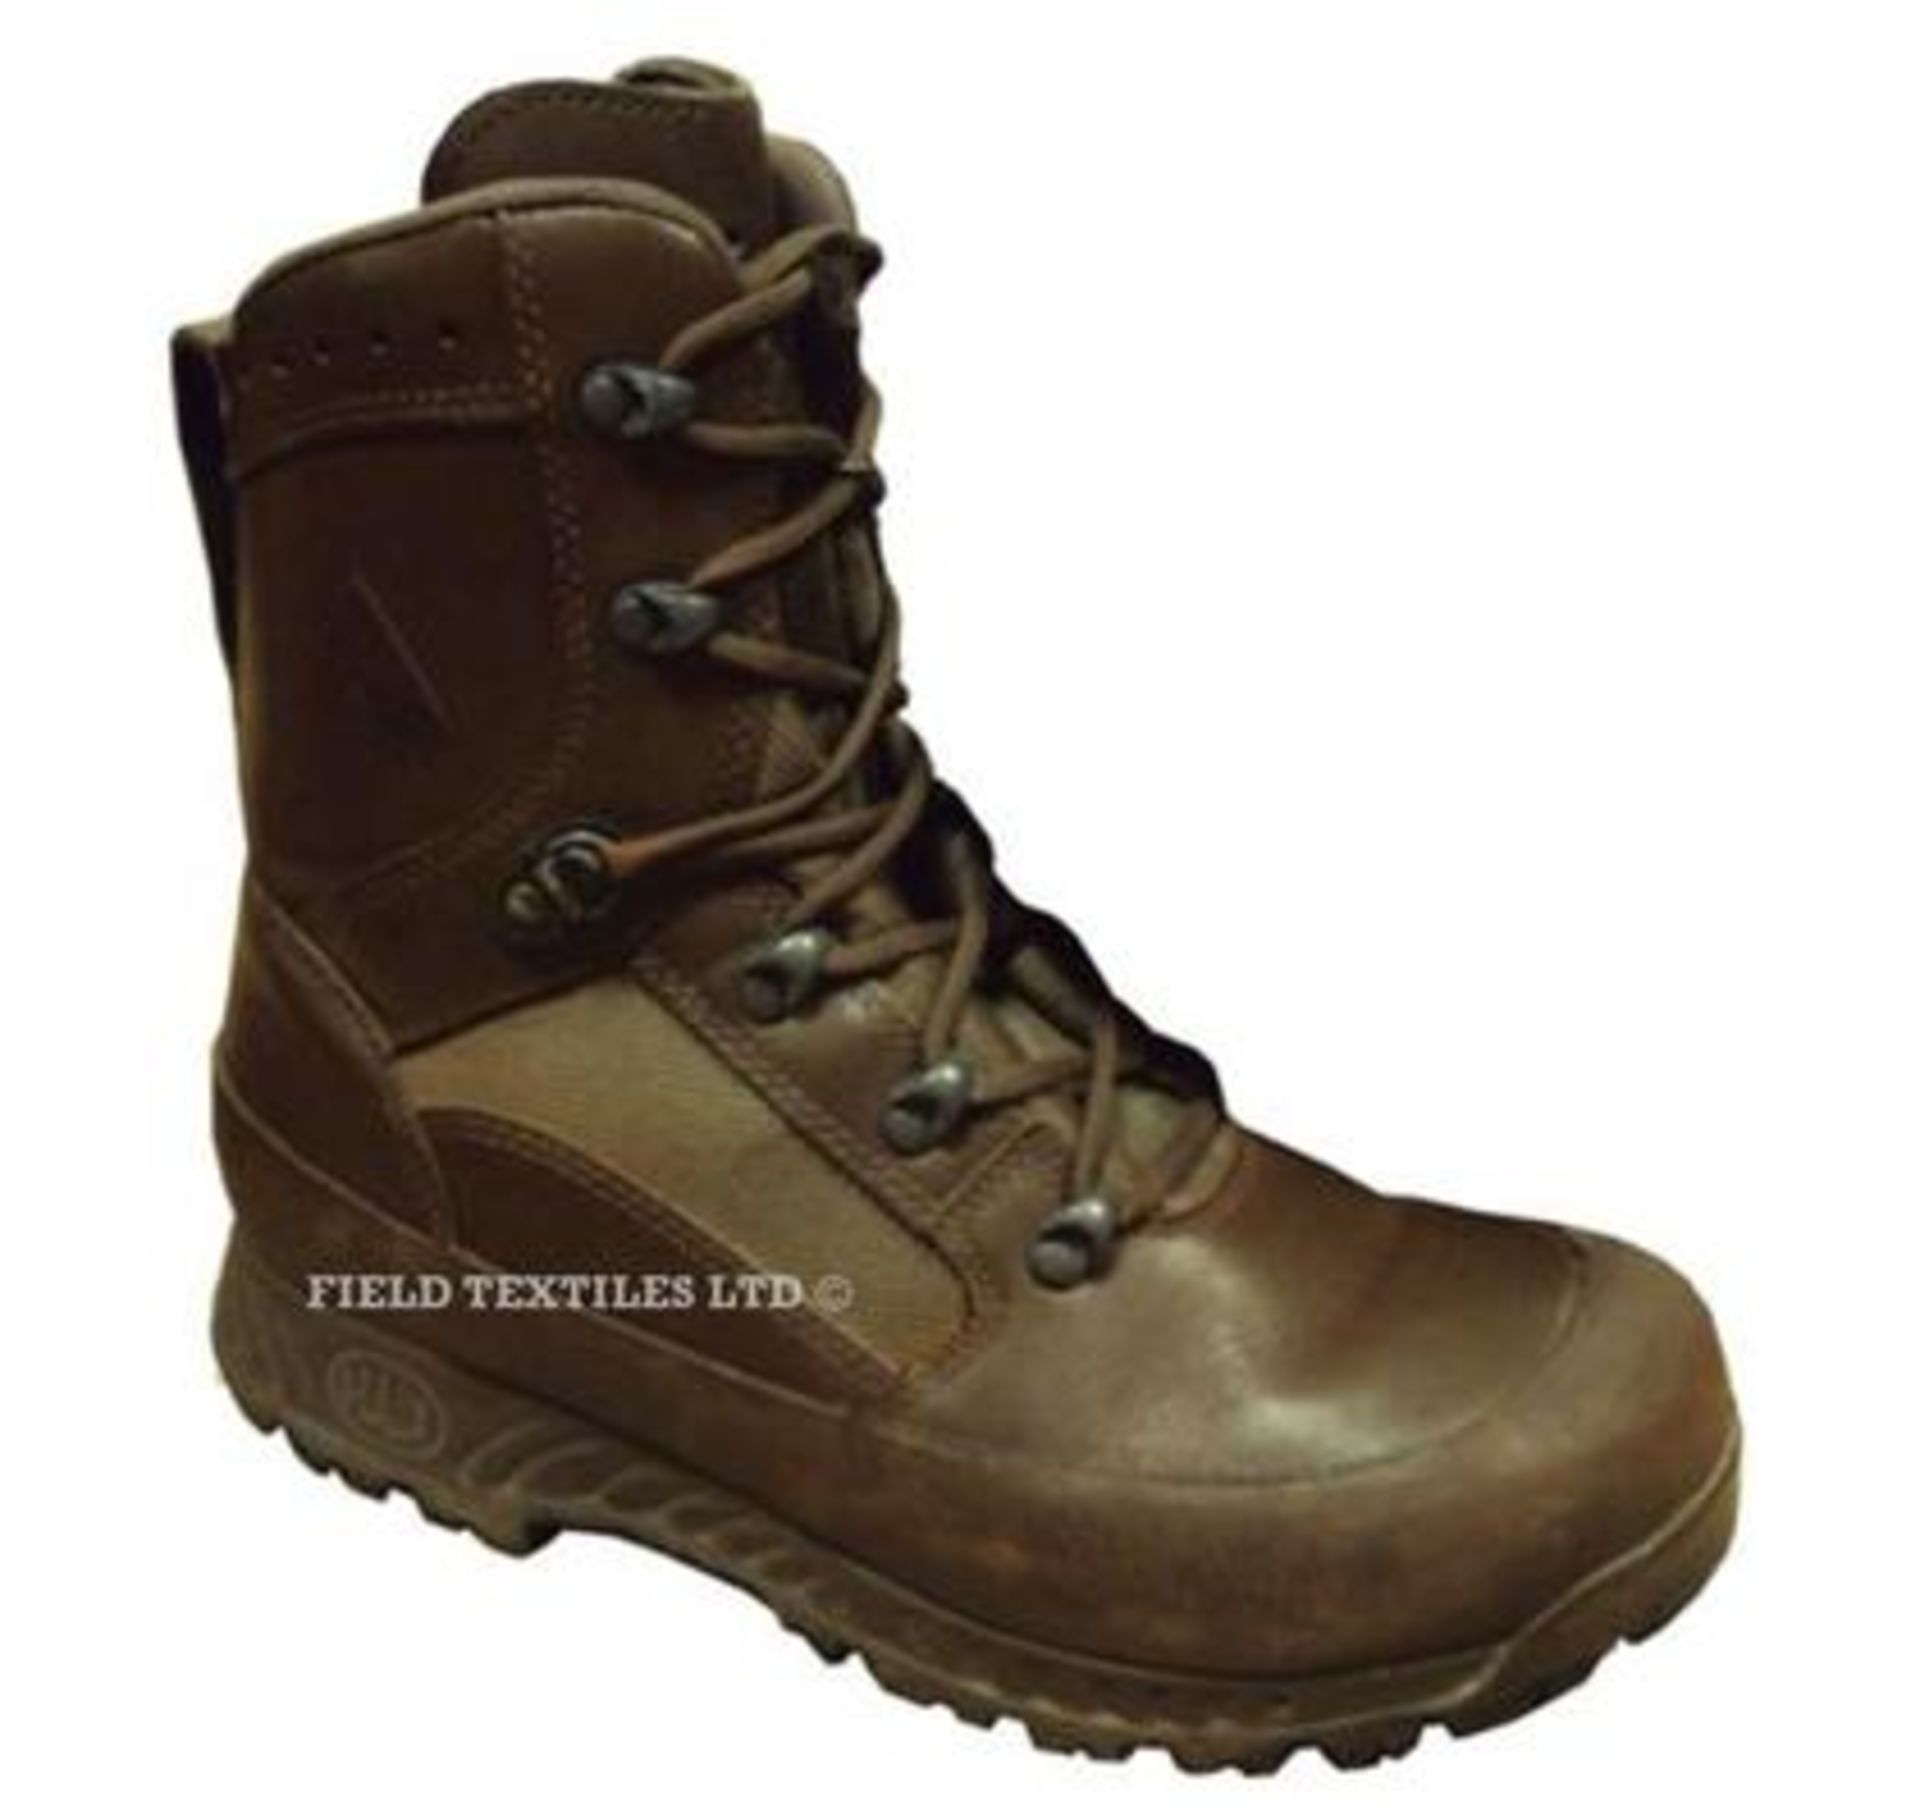 Pack of 5 - Haix Brown Boots - Grade 1 - Mix of Sizes